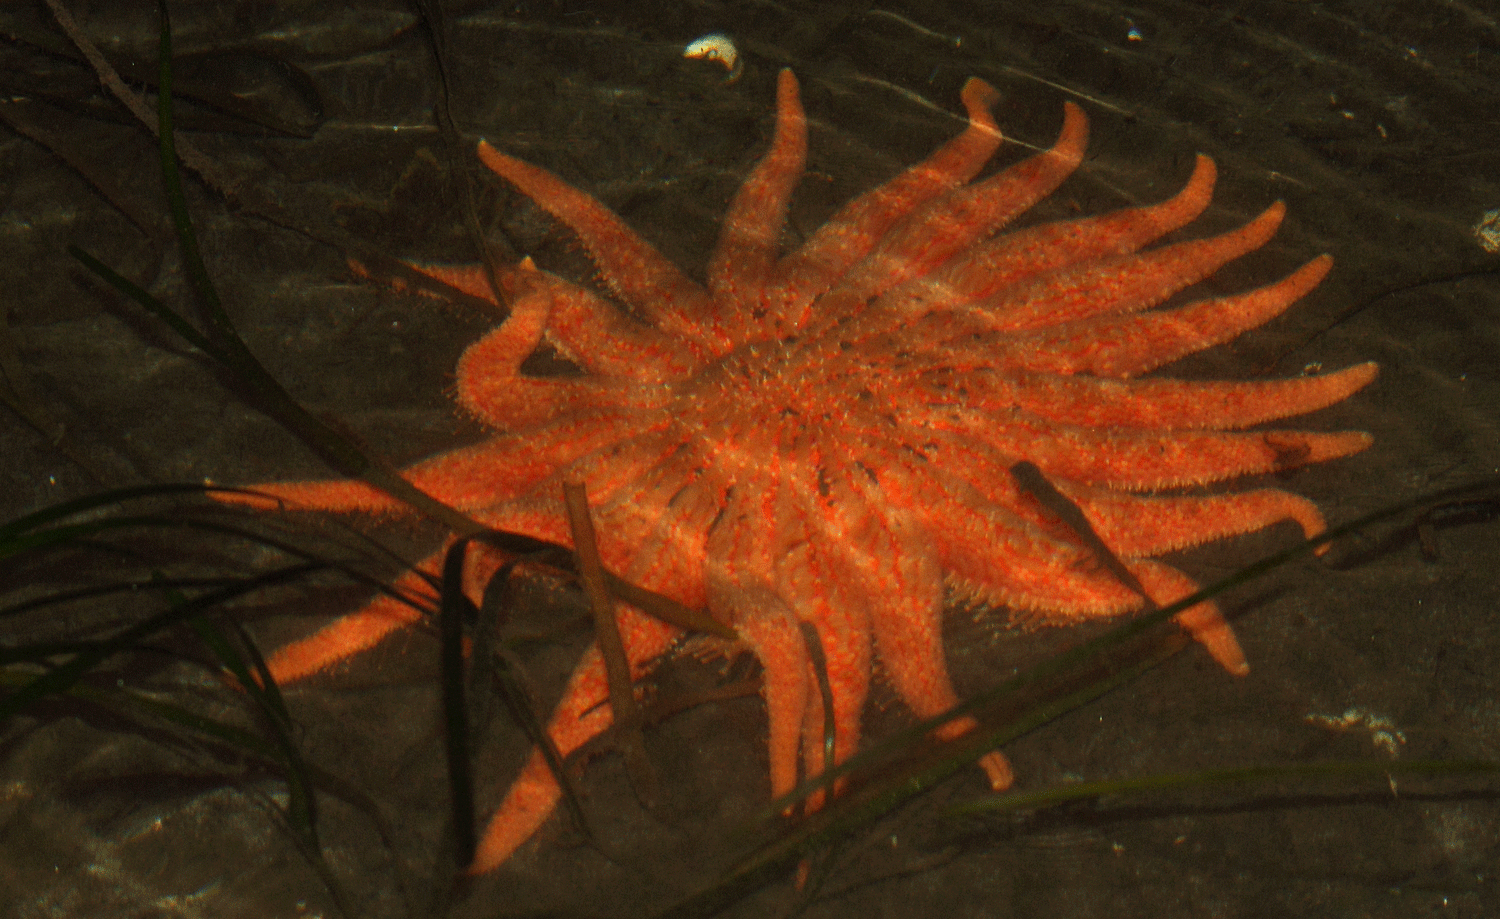 Sunflower seastar moving through eelgrass at night in about two feet of water. This starfish is about 30 inches (76 cm) across.